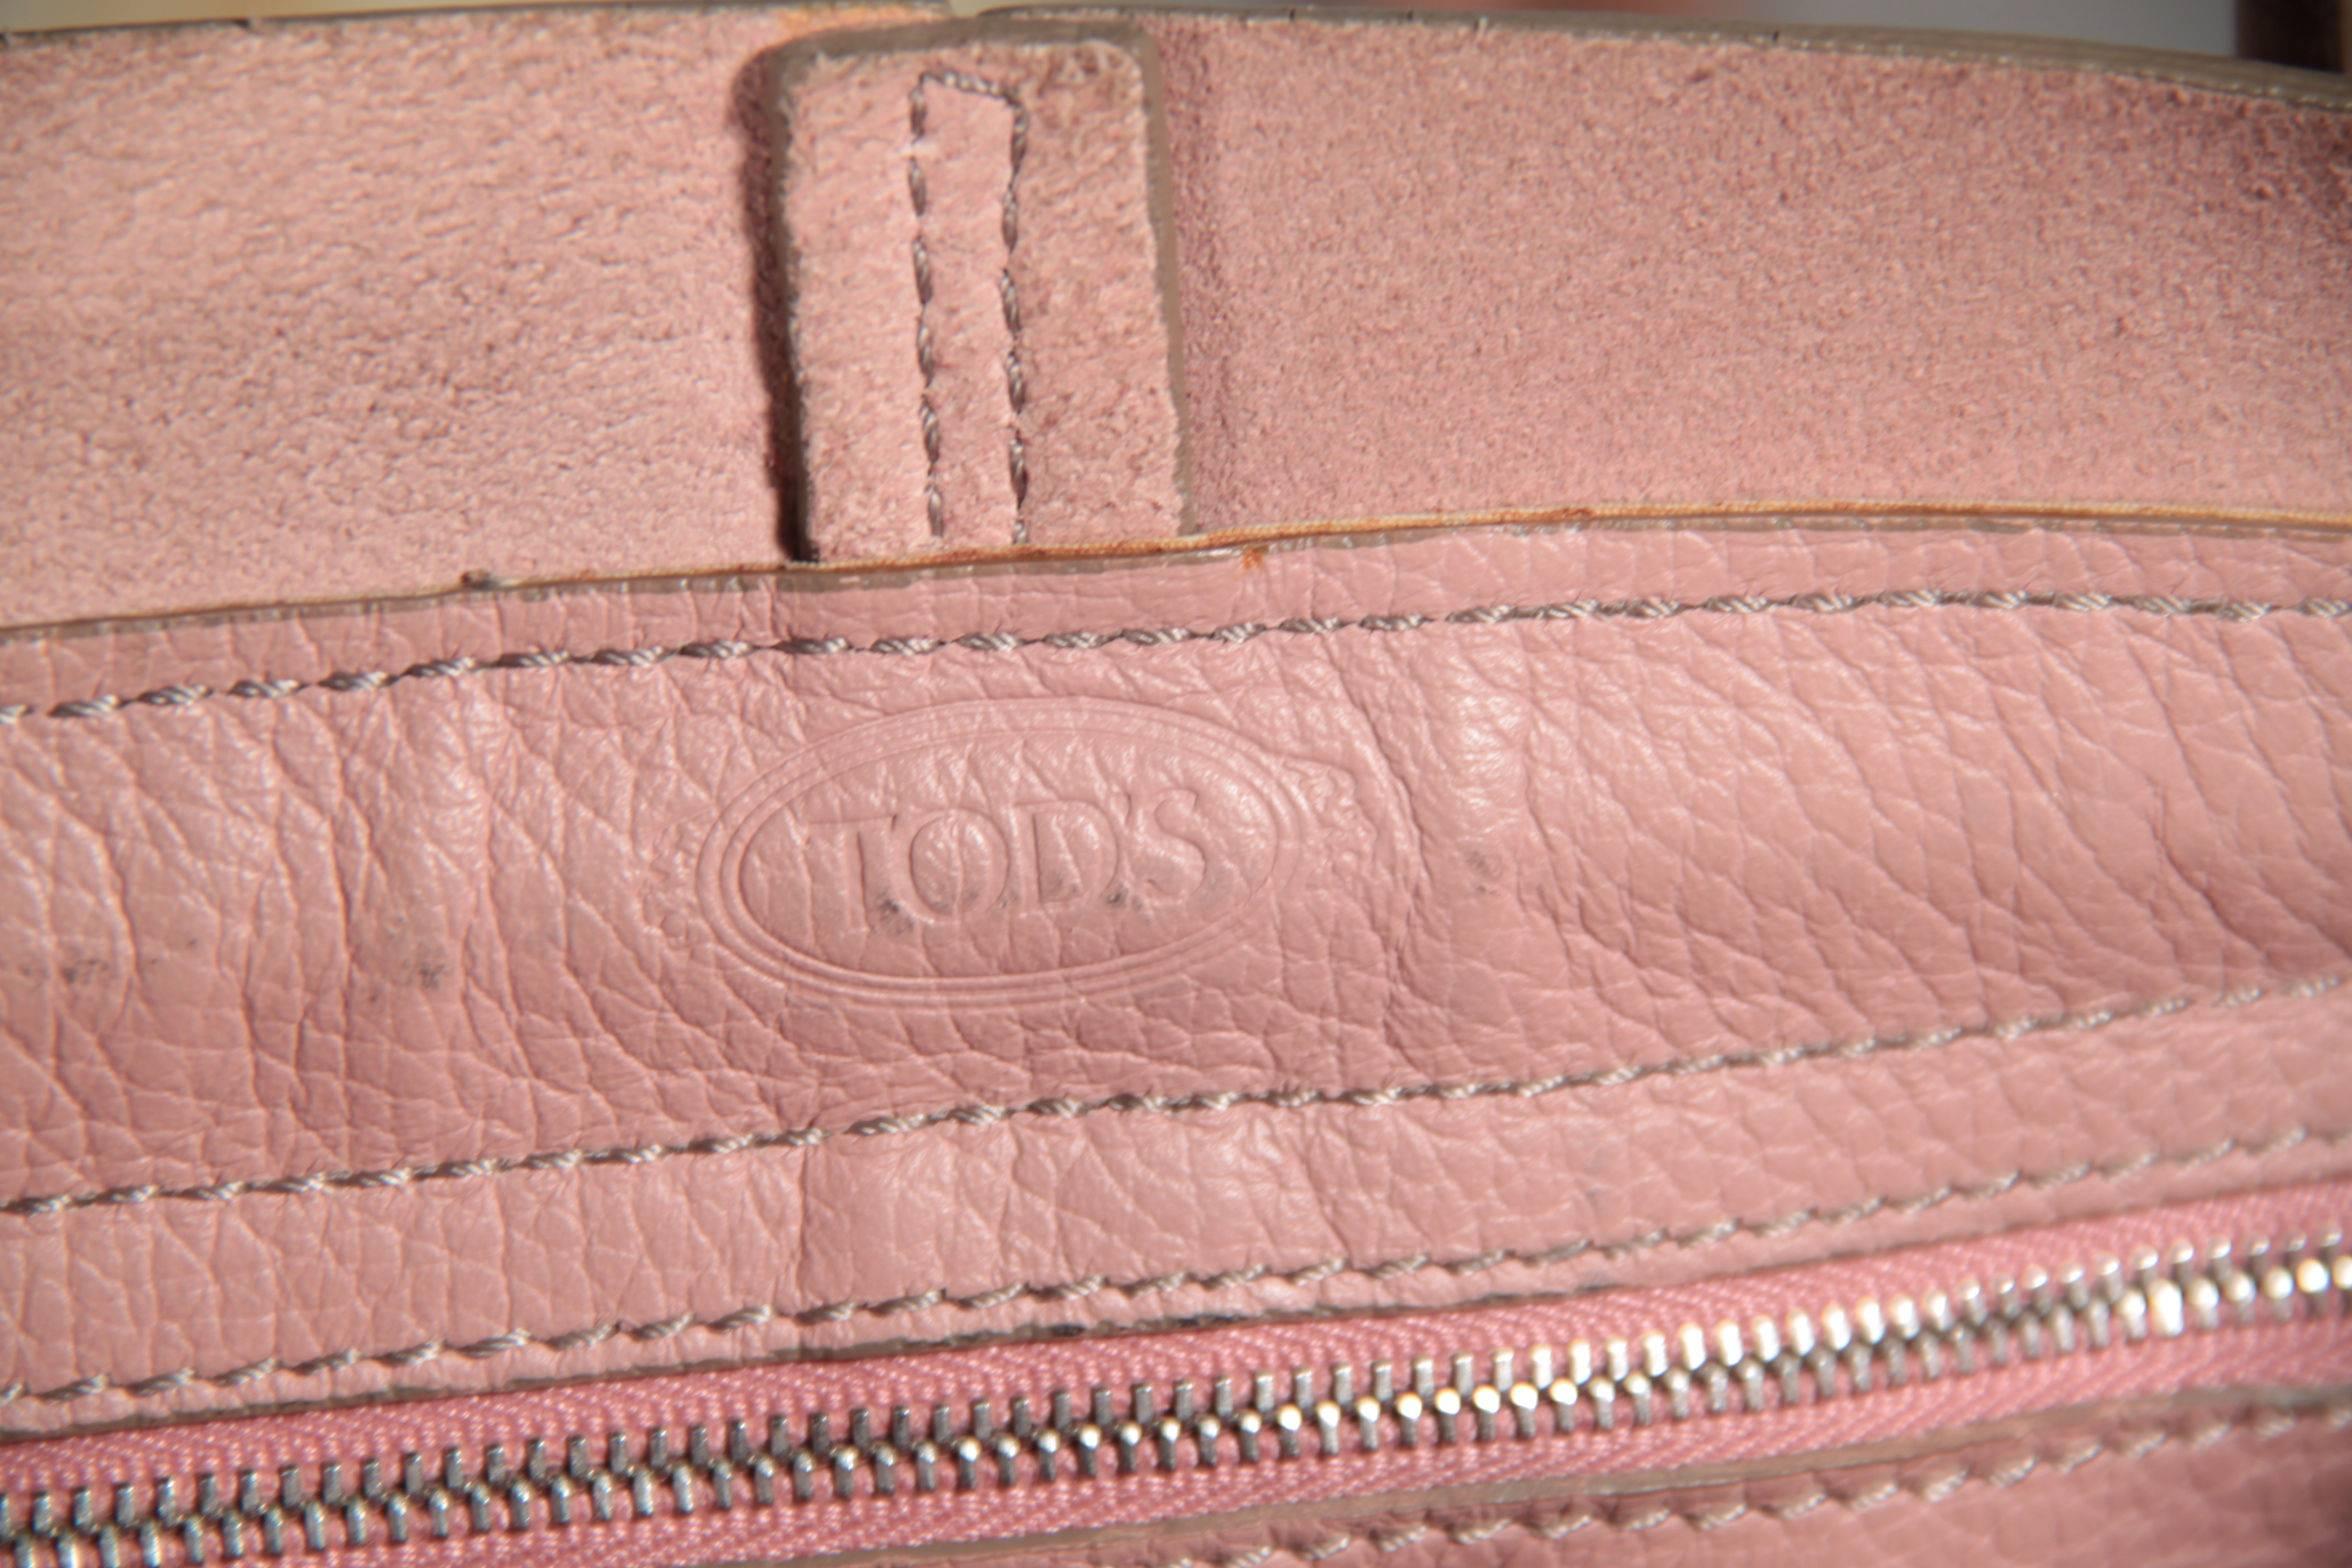 TOD'S Italian Pink Pebbled Leather Small NEW D BAG Handtasche TOTE Umhängetasche 5